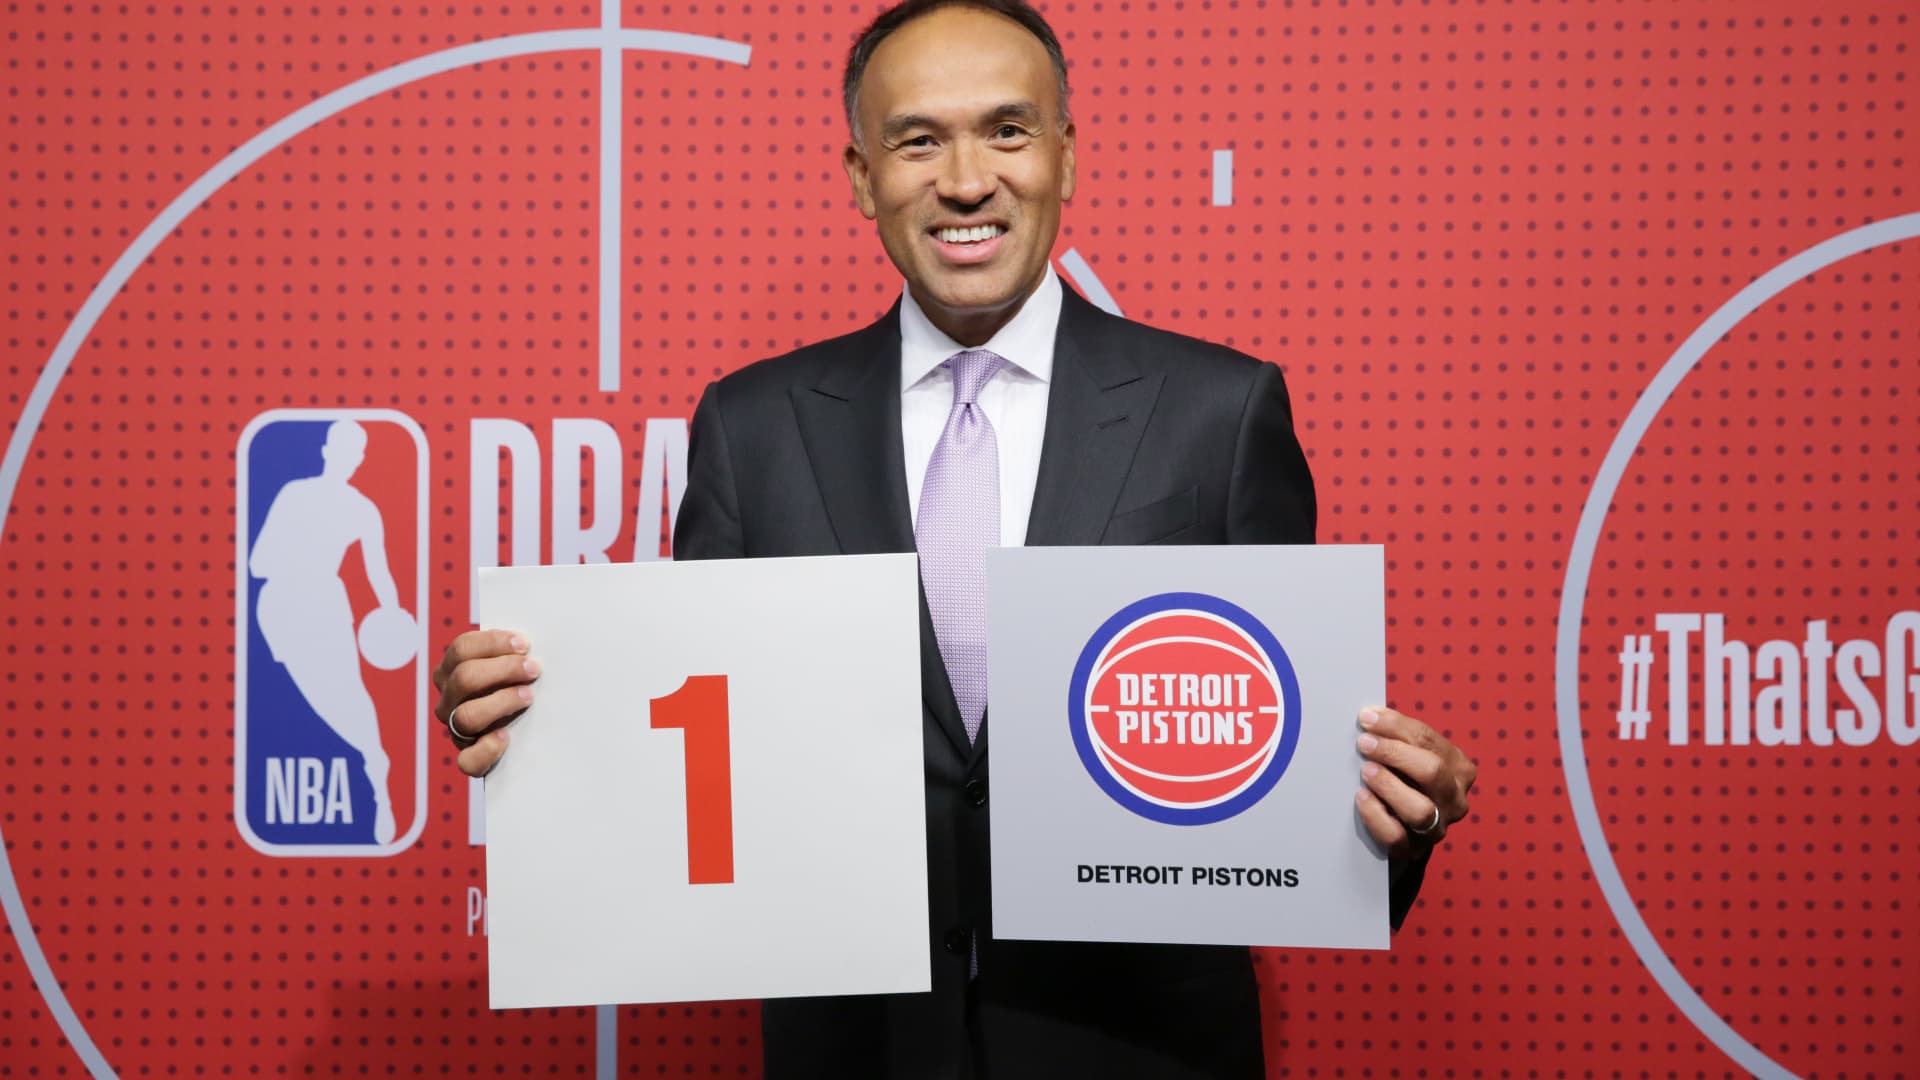 Deputy Commissioner of the NBA, Mark Tatum holds up the card of the Detroit Pistons after they get the 1st overall pick in the NBA Draft during the 2021 NBA Draft Lottery on June 22, 2021 at the NBA Entertainment Studios in Secaucus, New Jersey.